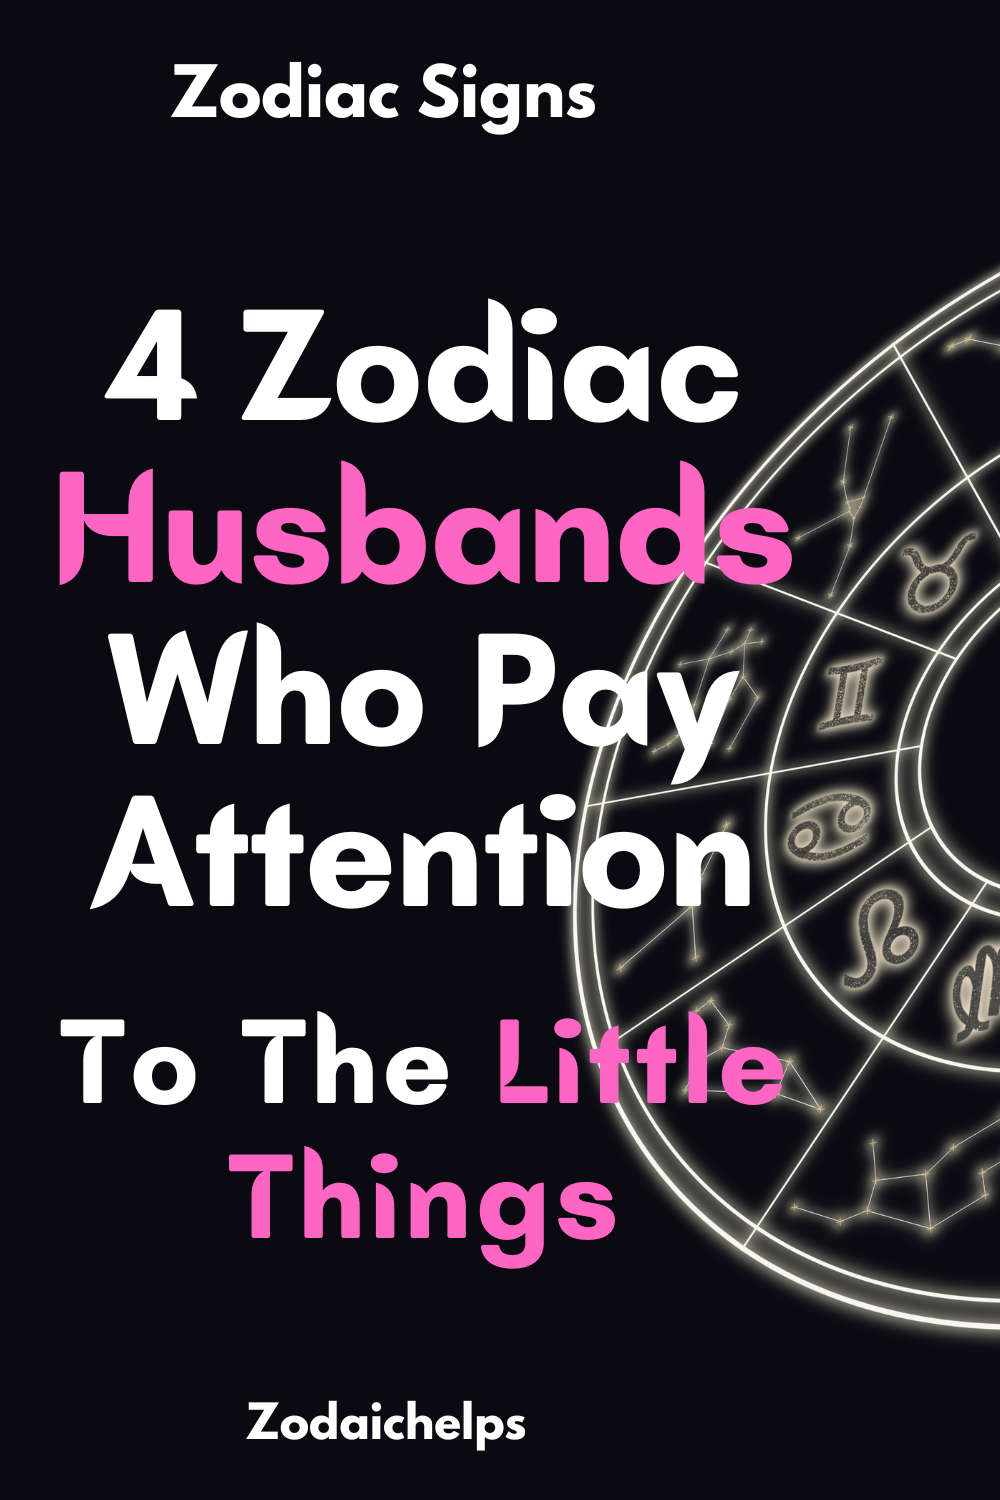 4 Zodiac Husbands Who Pay Attention To The Little Things